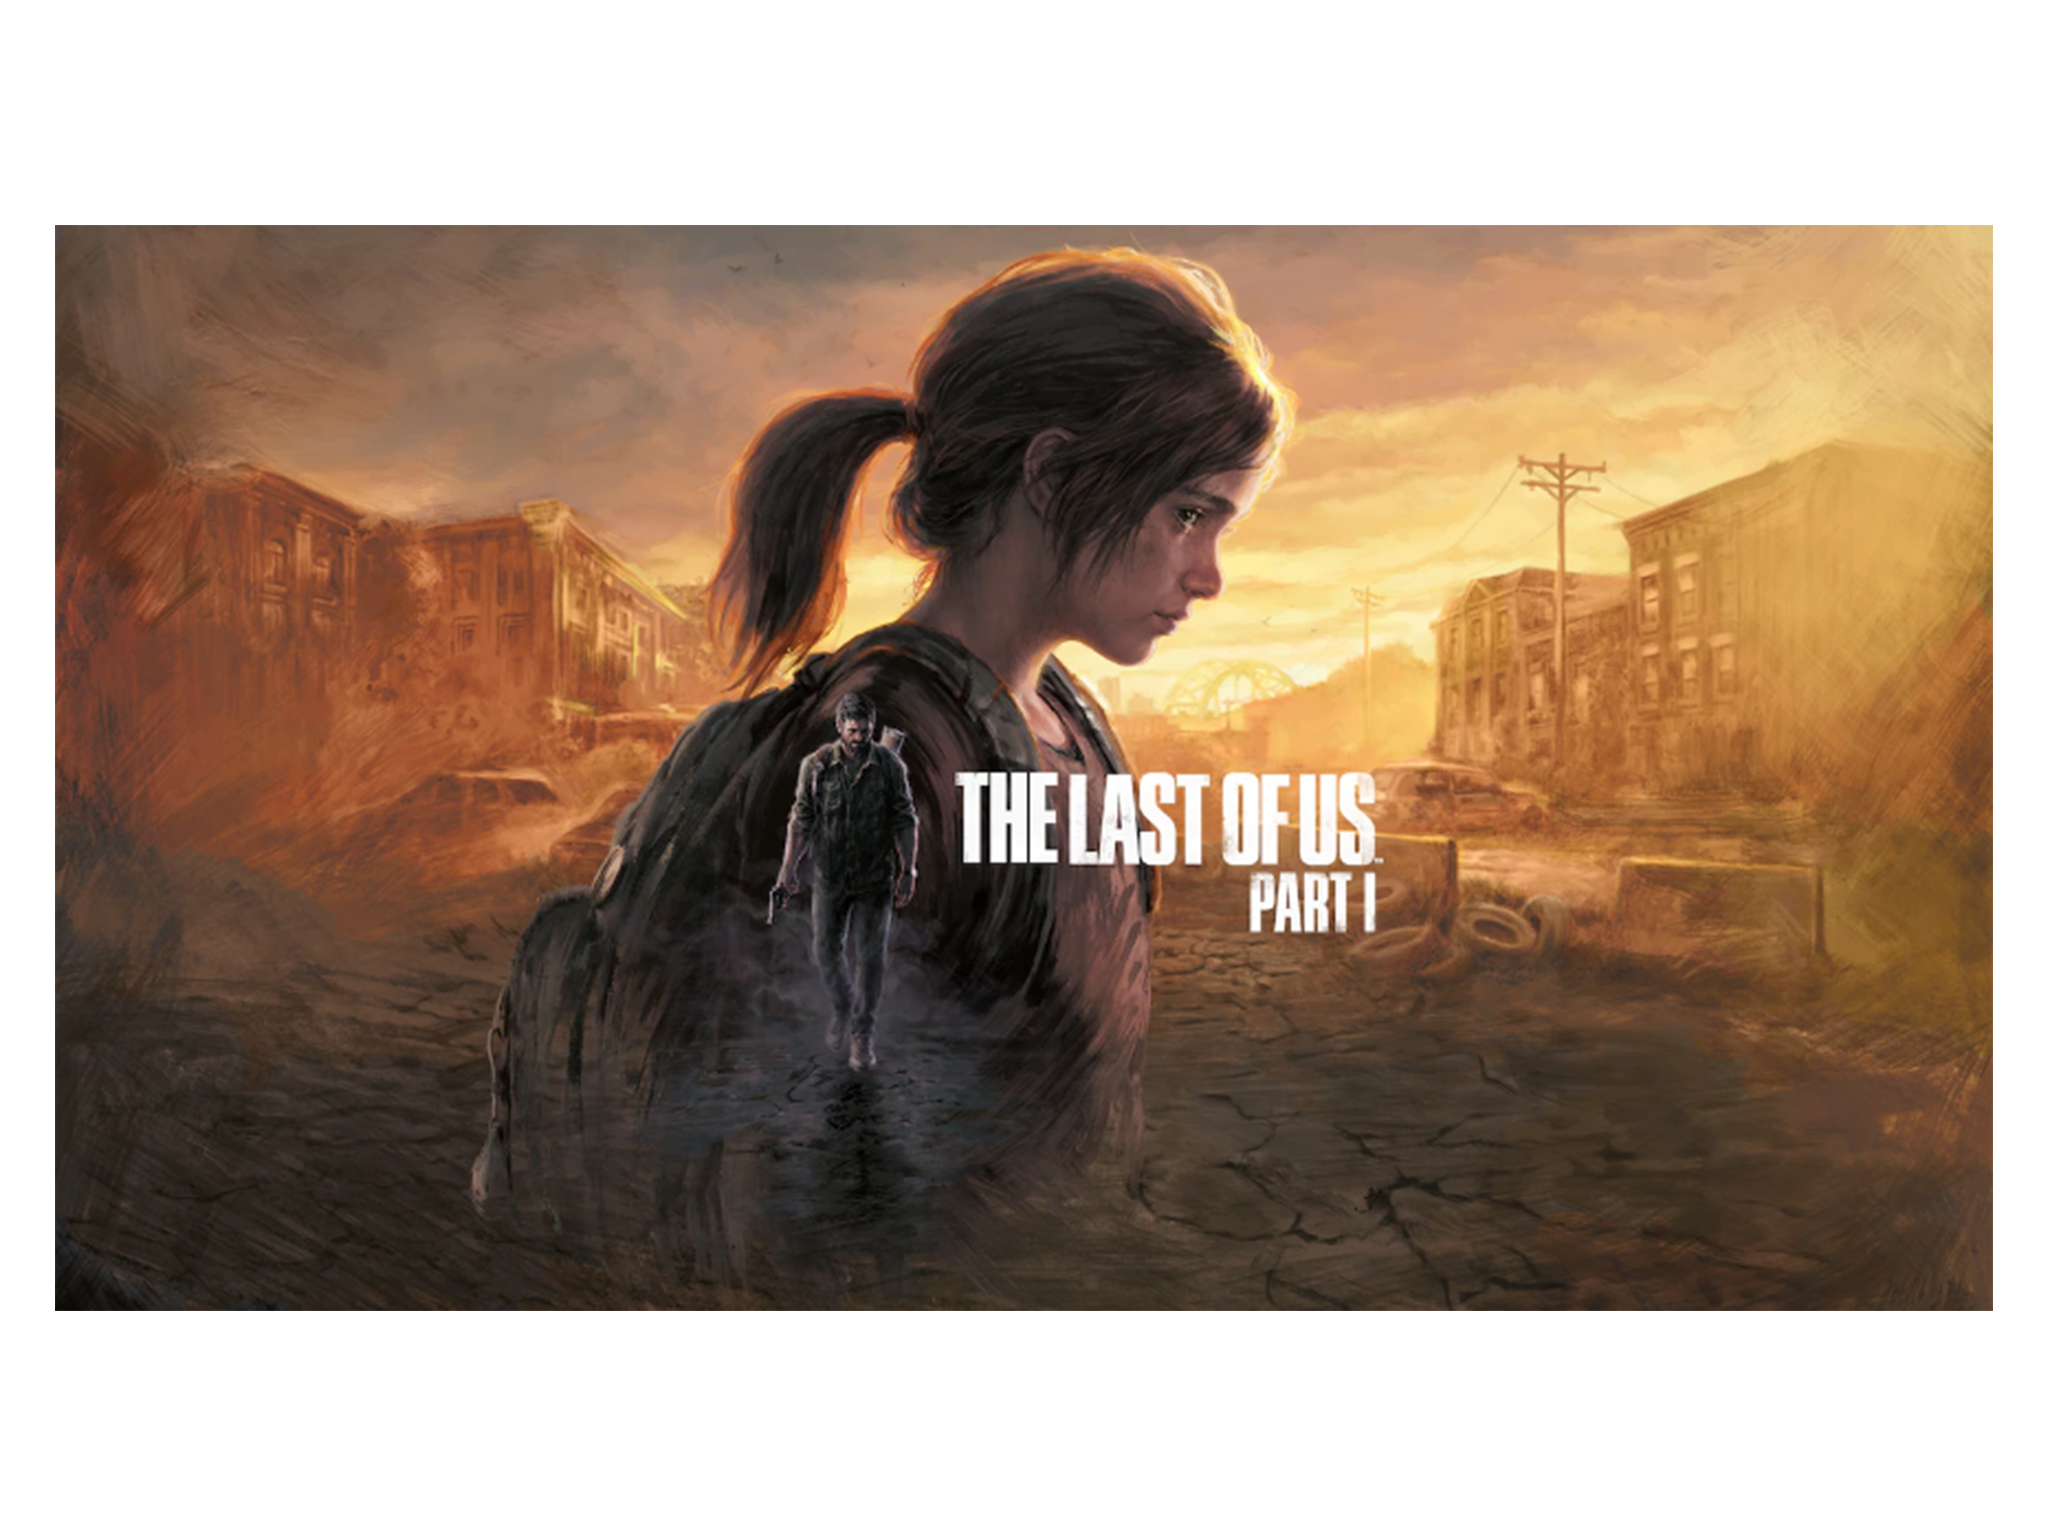 Here's where you can pre-order The Last of Us Part 1 remake on PlayStation  5